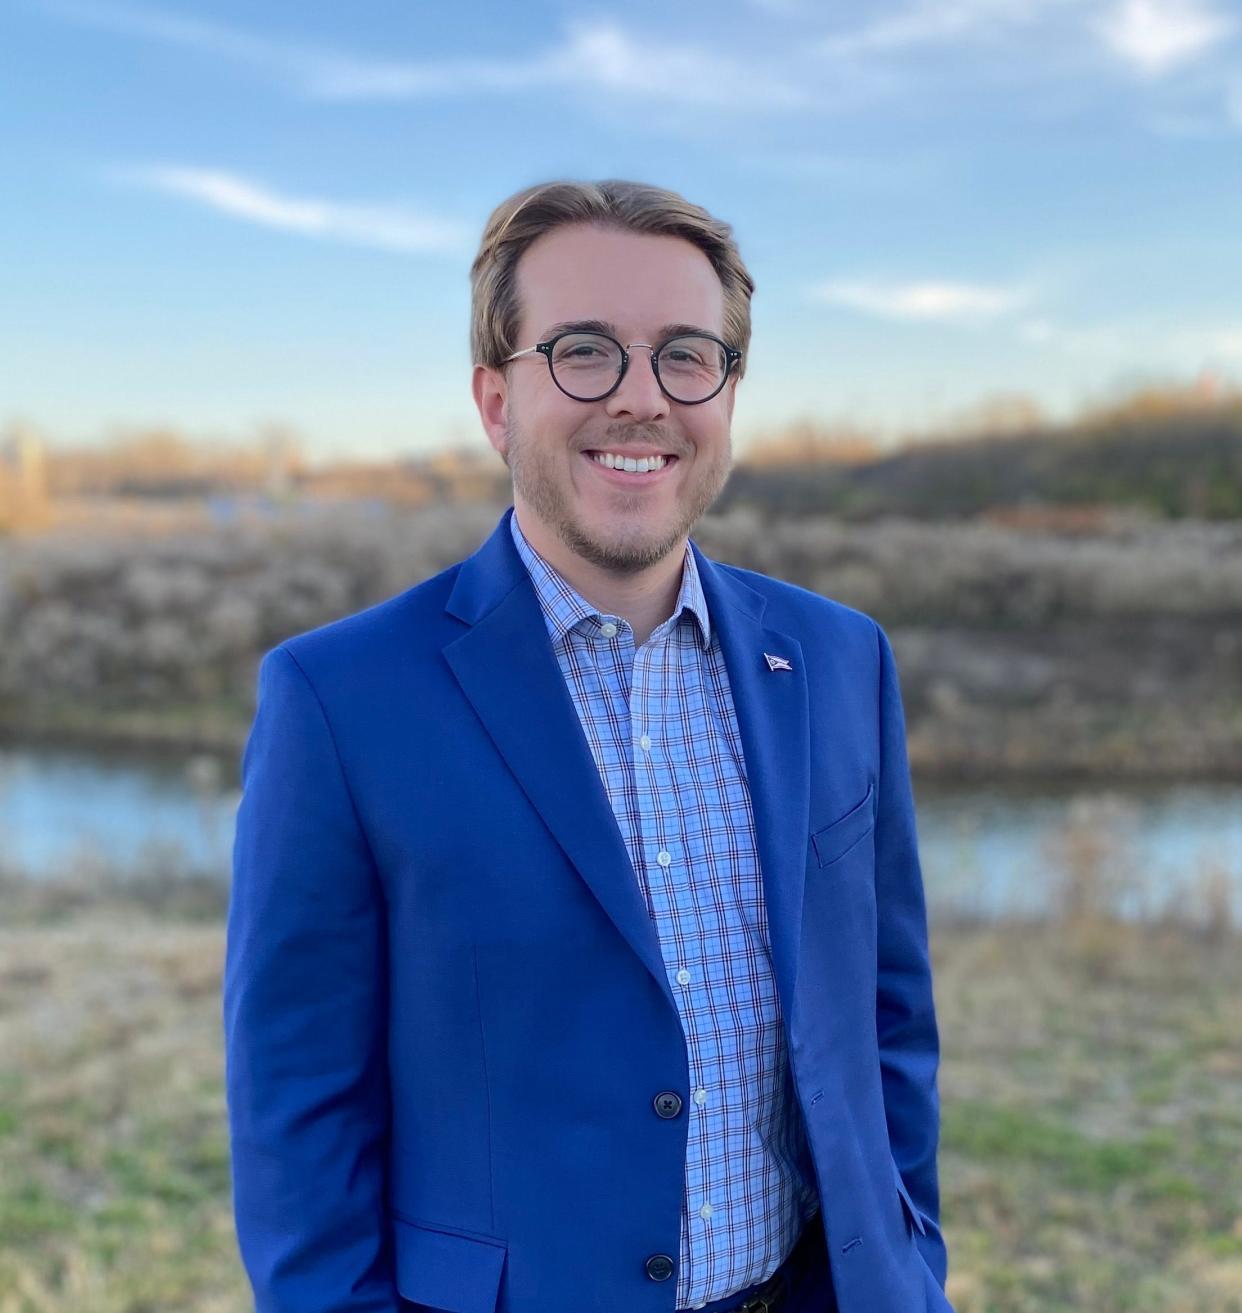 Eli Bohnert is running in the Democratic primary to represent Ohio House District 6, which includes parts of Columbus' West Side.